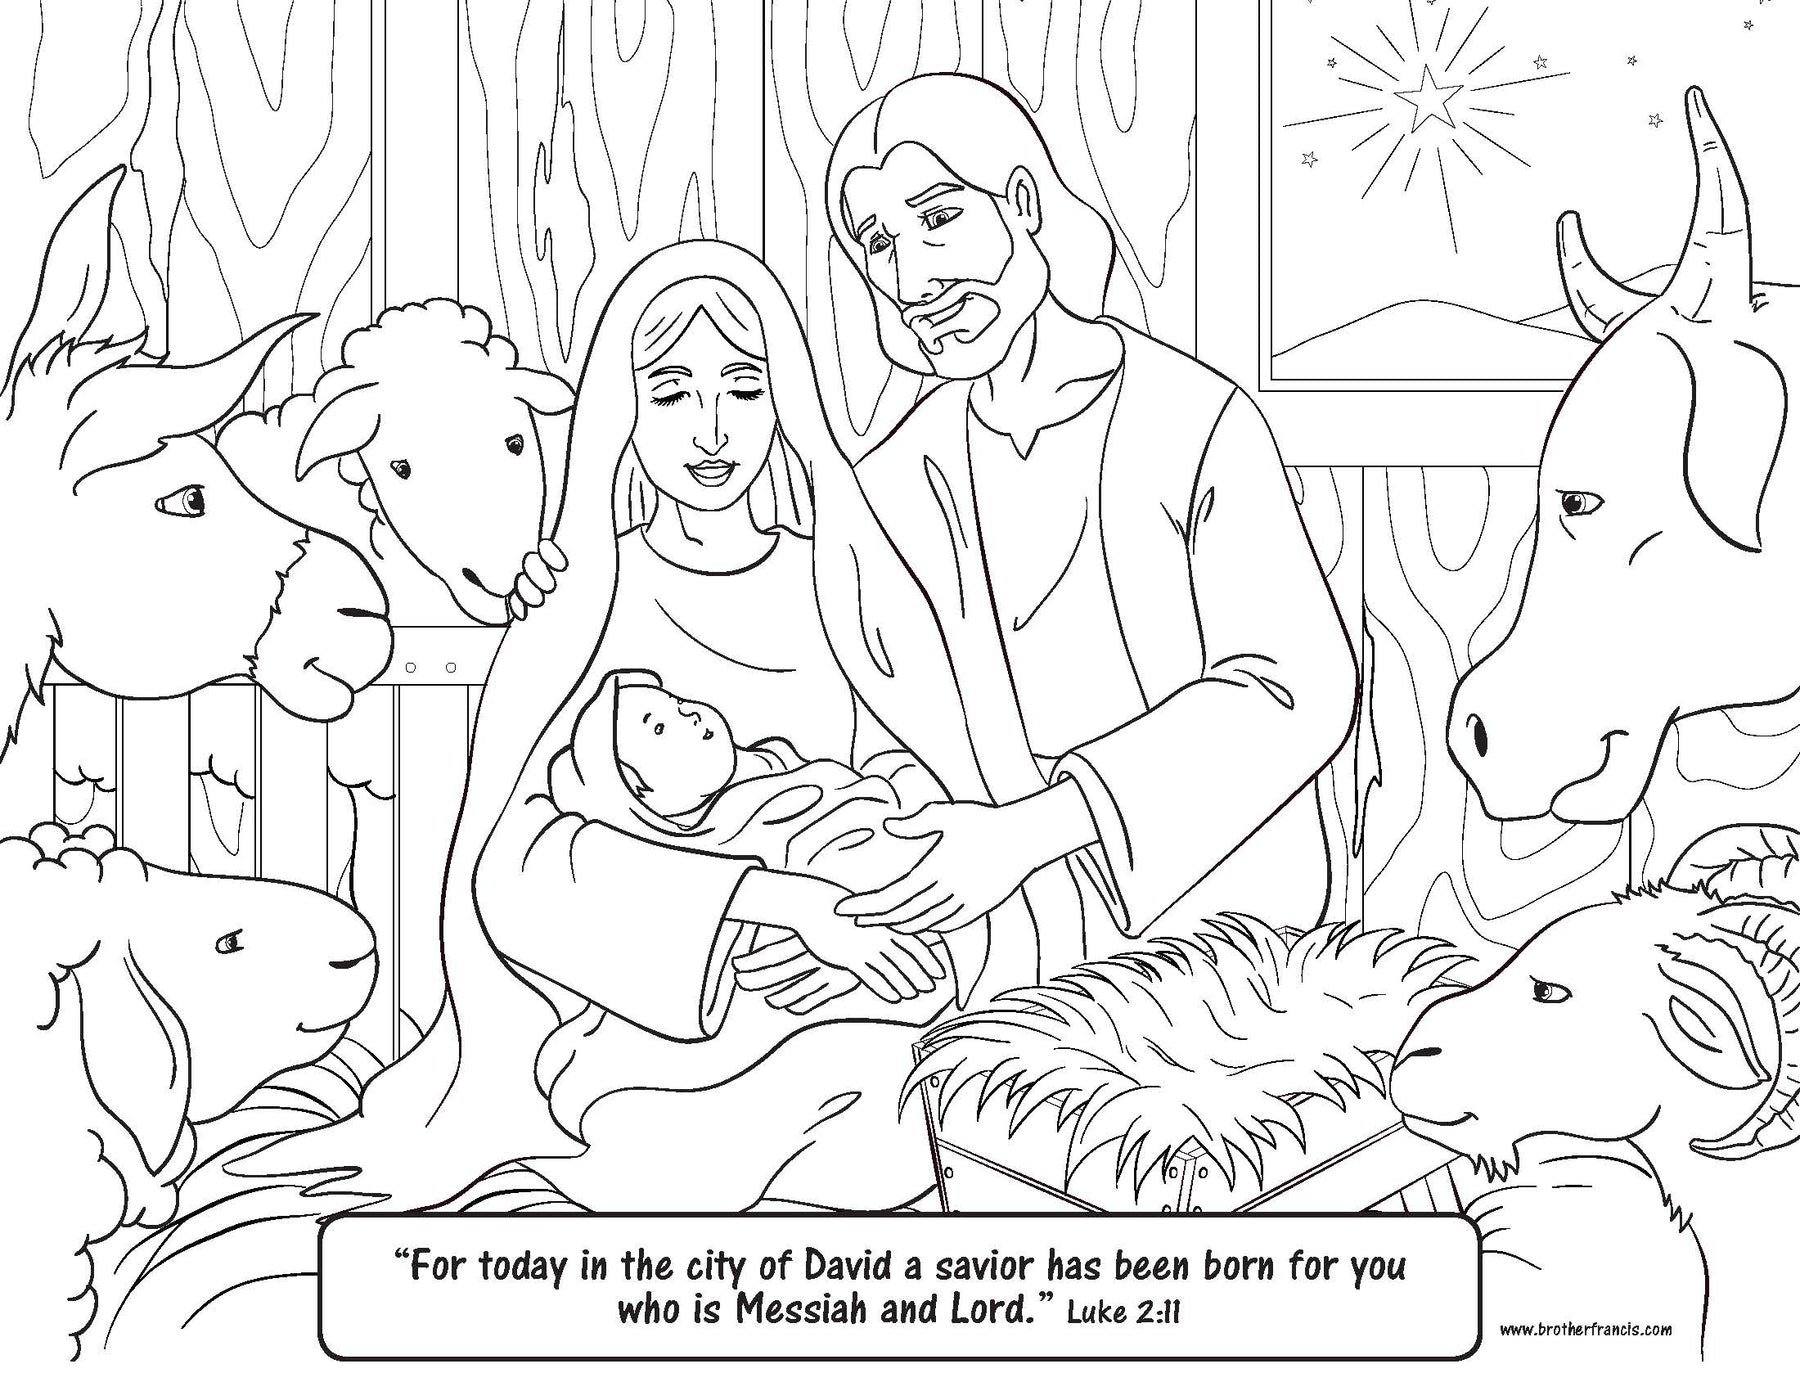 Download and Print - Christmas Nativity Scene